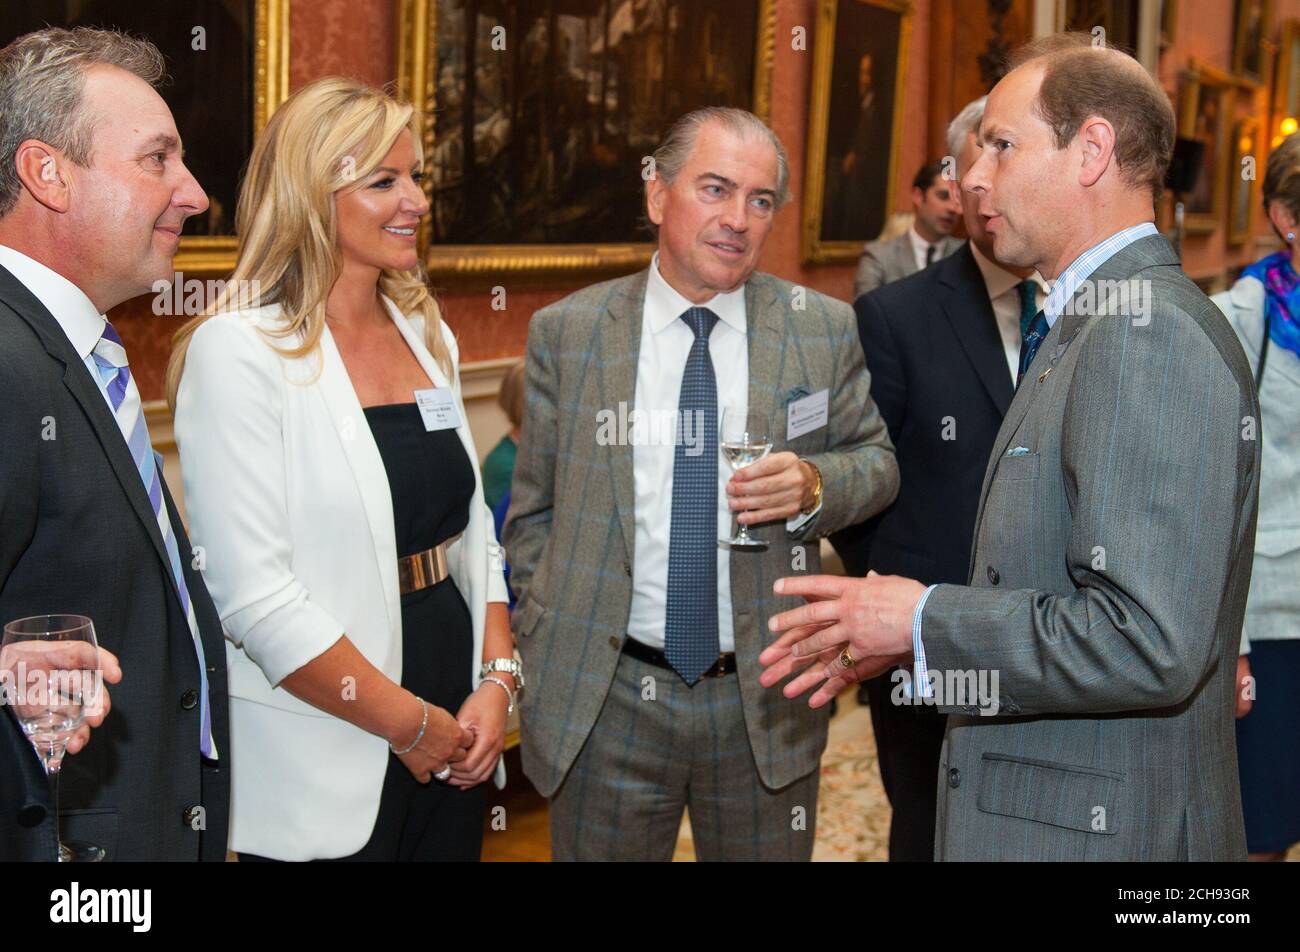 The Earl of Wessex (right) meets Baroness Michelle Mone (second from left) at a reception ahead of the Duke of Edinburgh Award garden party, at Buckingham Palace, London. Stock Photo